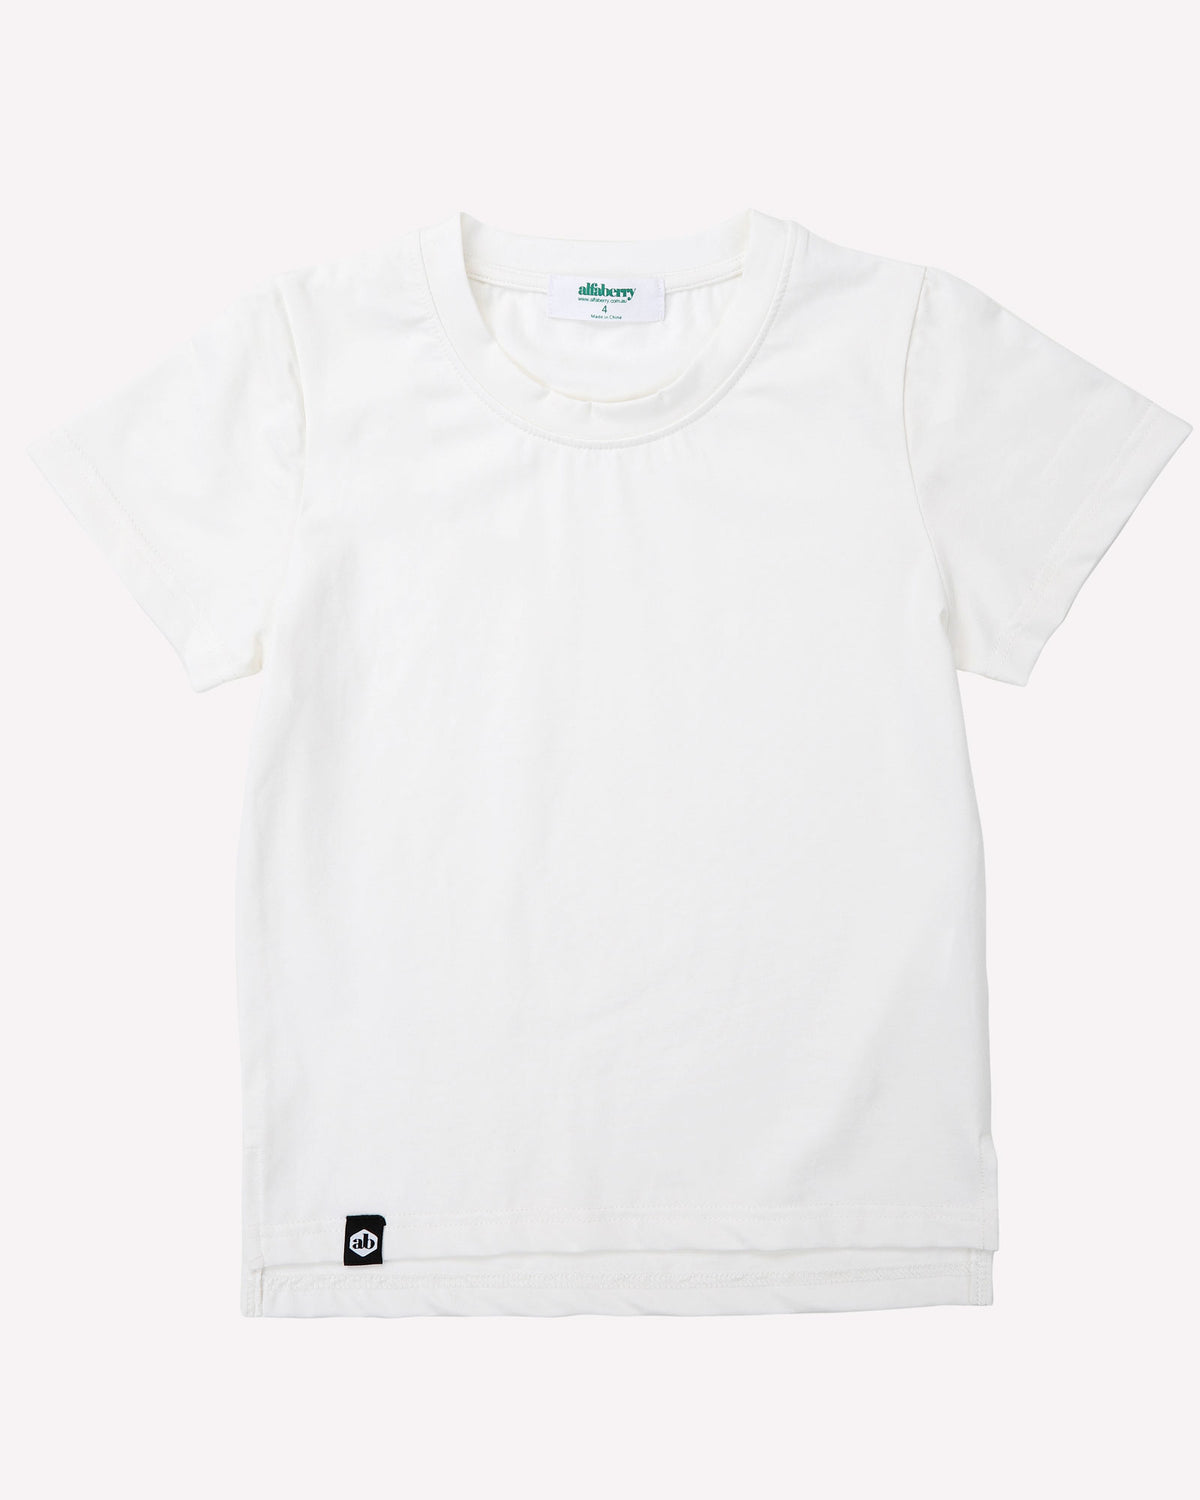 Buddy Tall Tee In Ivory